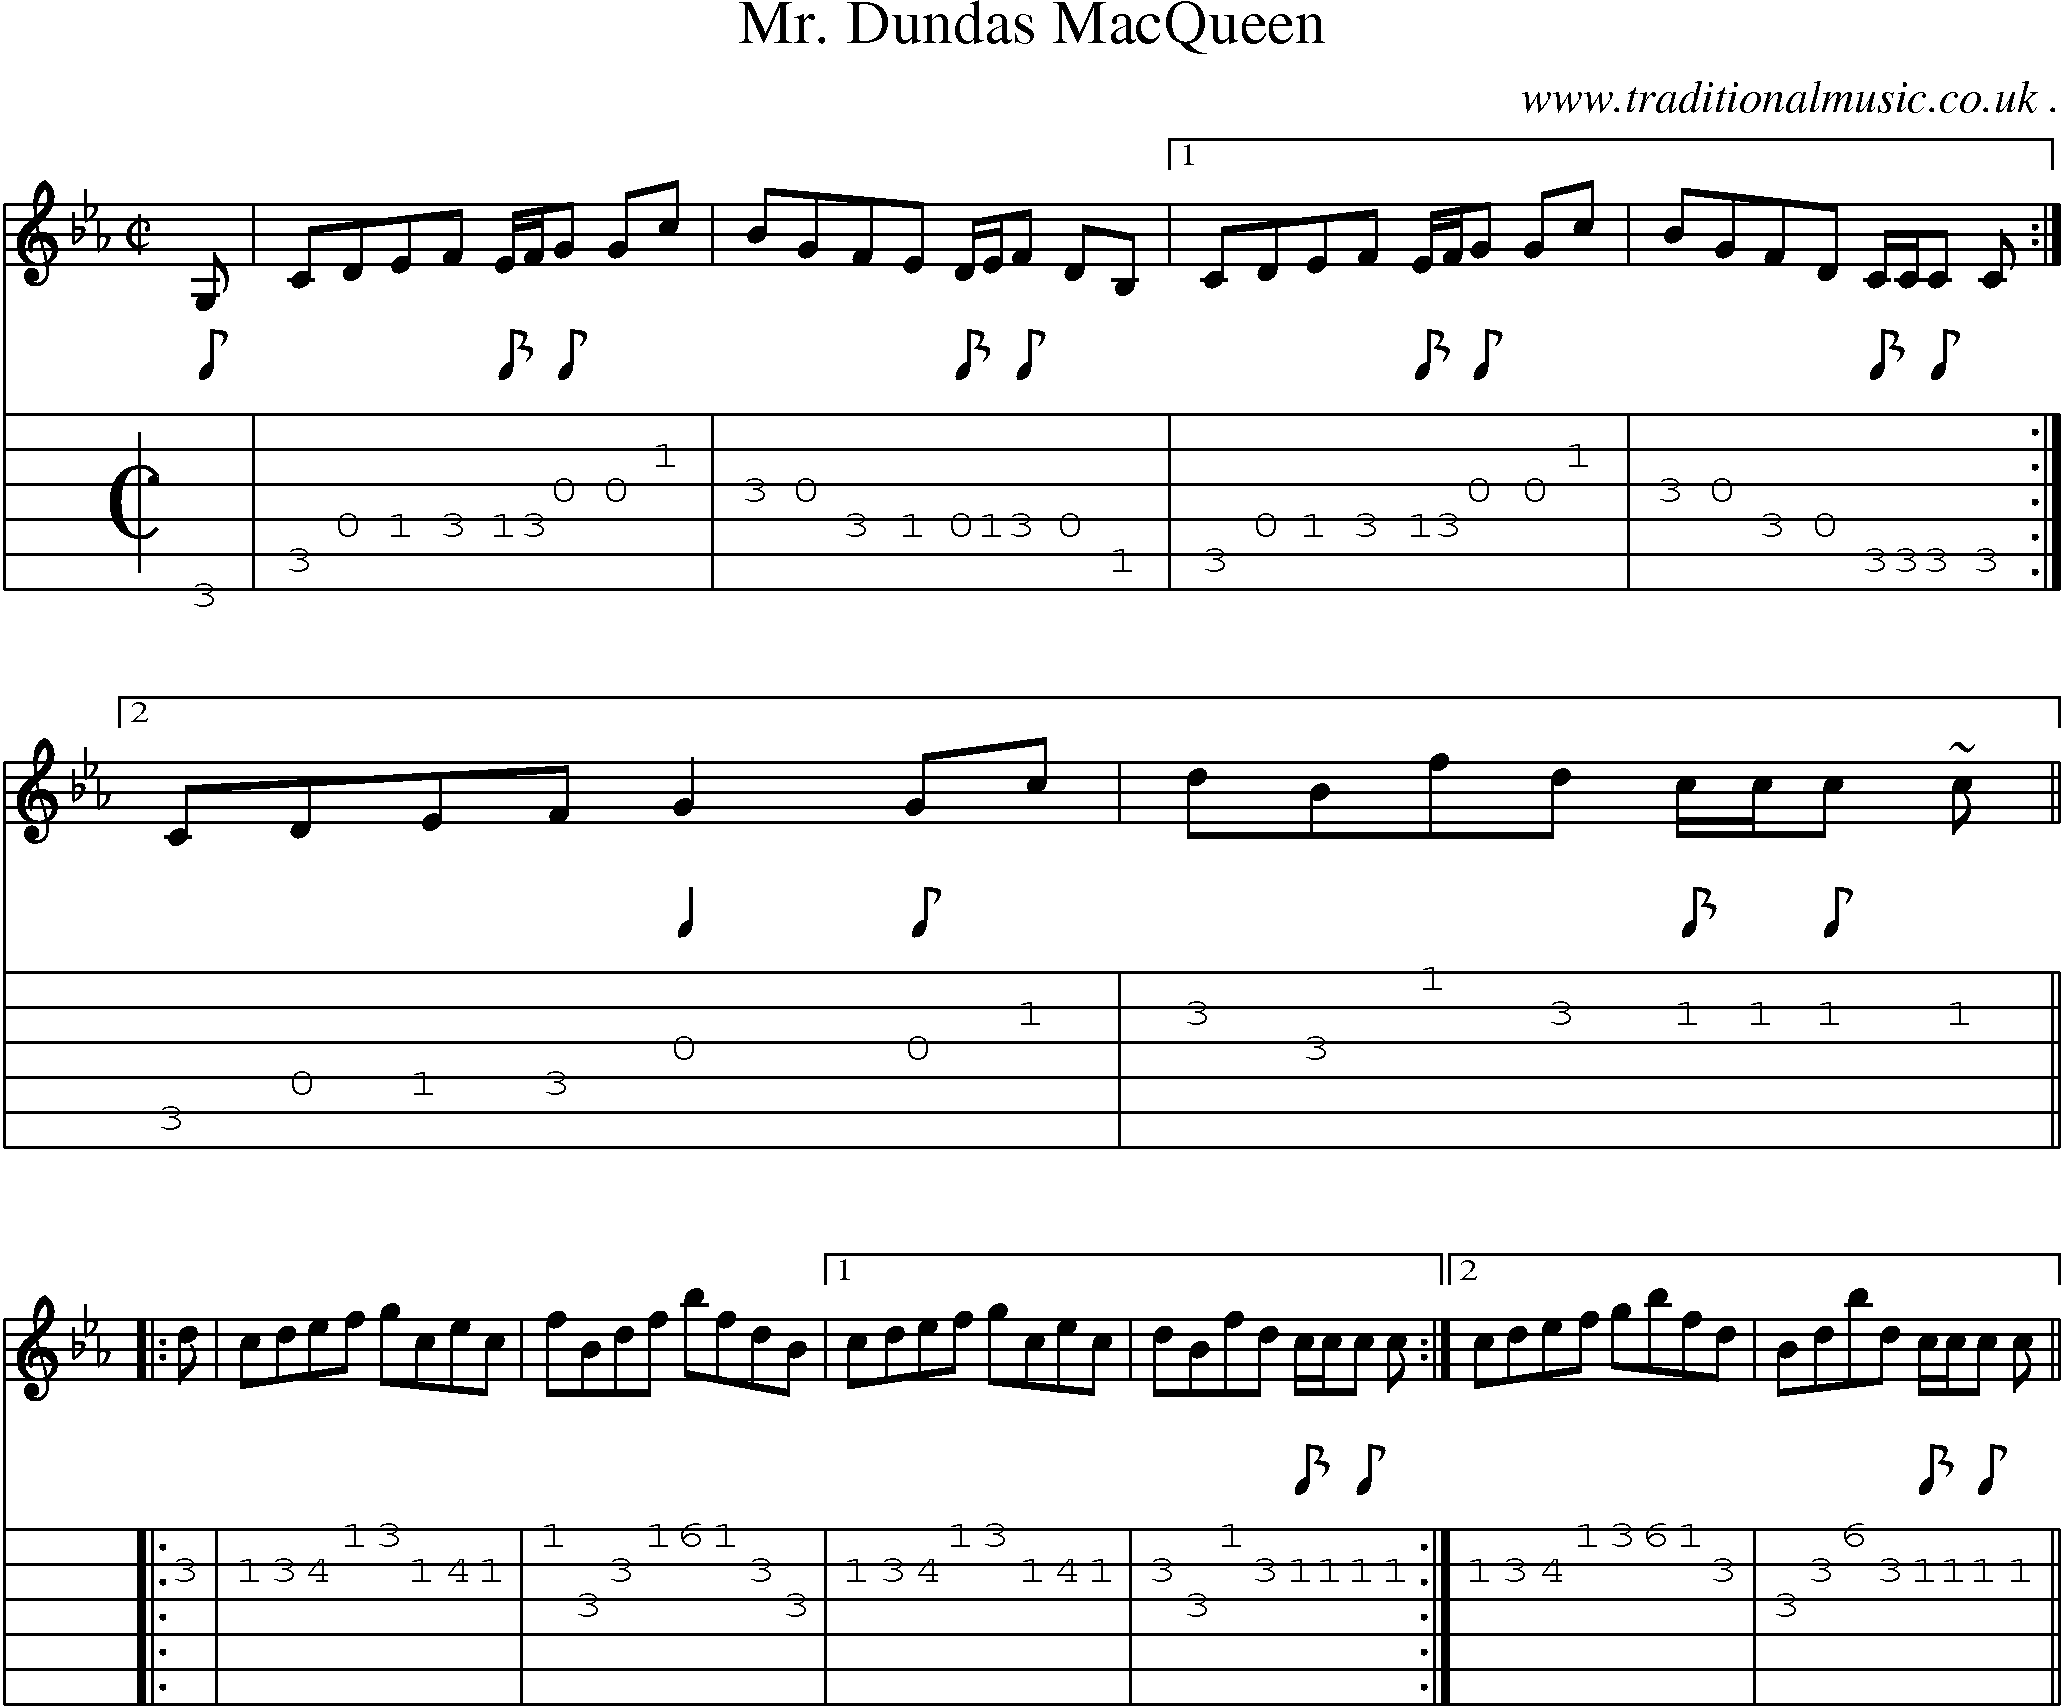 Sheet-music  score, Chords and Guitar Tabs for Mr Dundas Macqueen